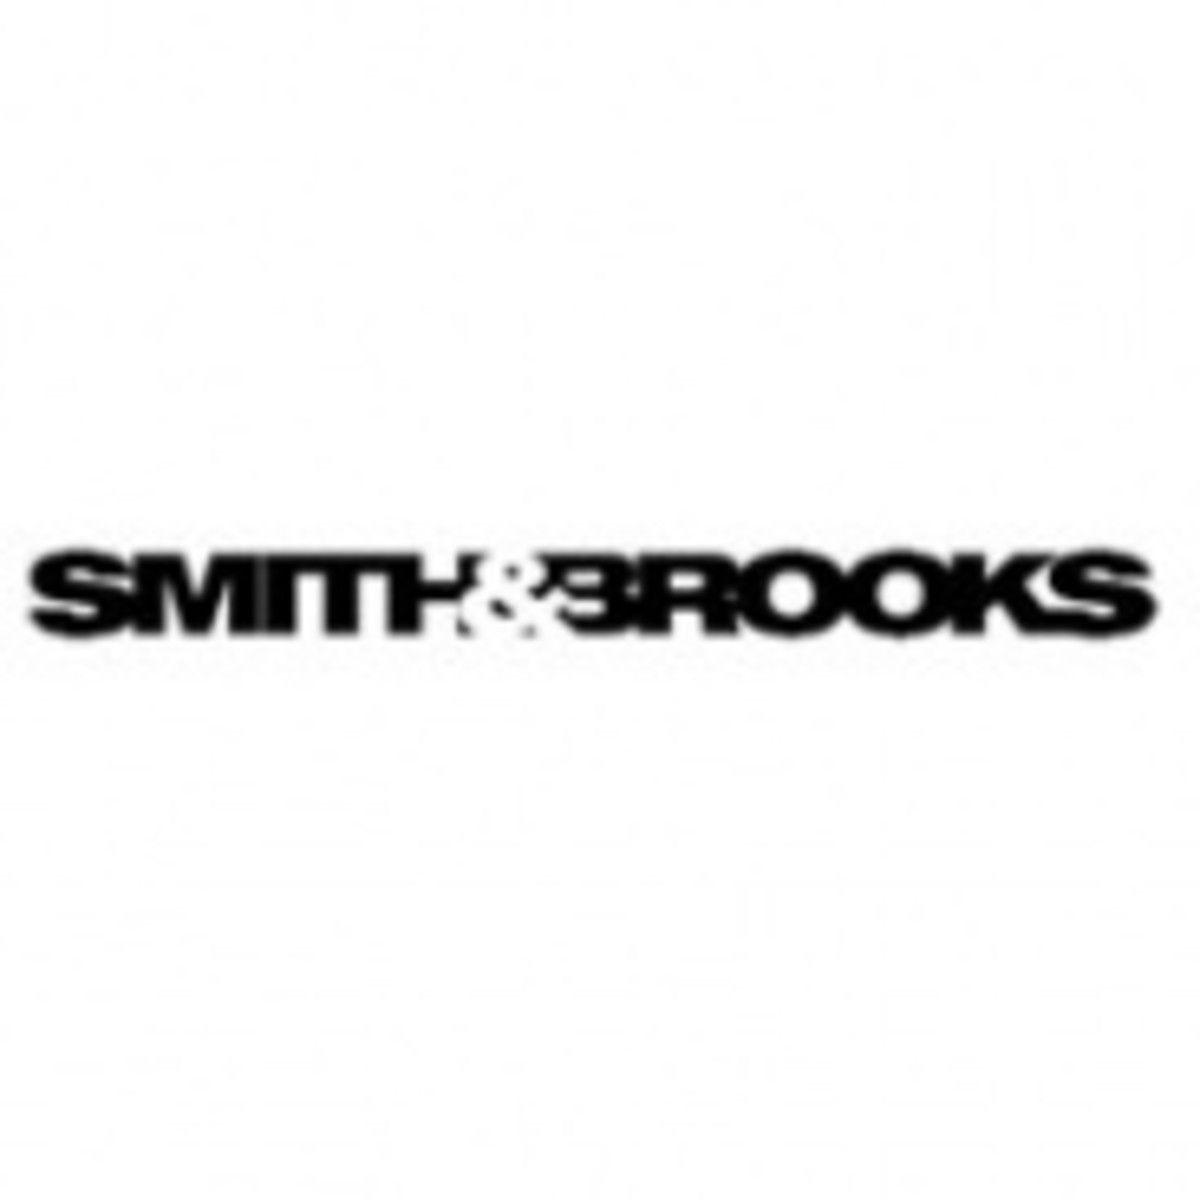 Brooks Logo - Smith & Brooks unveils new footwear division